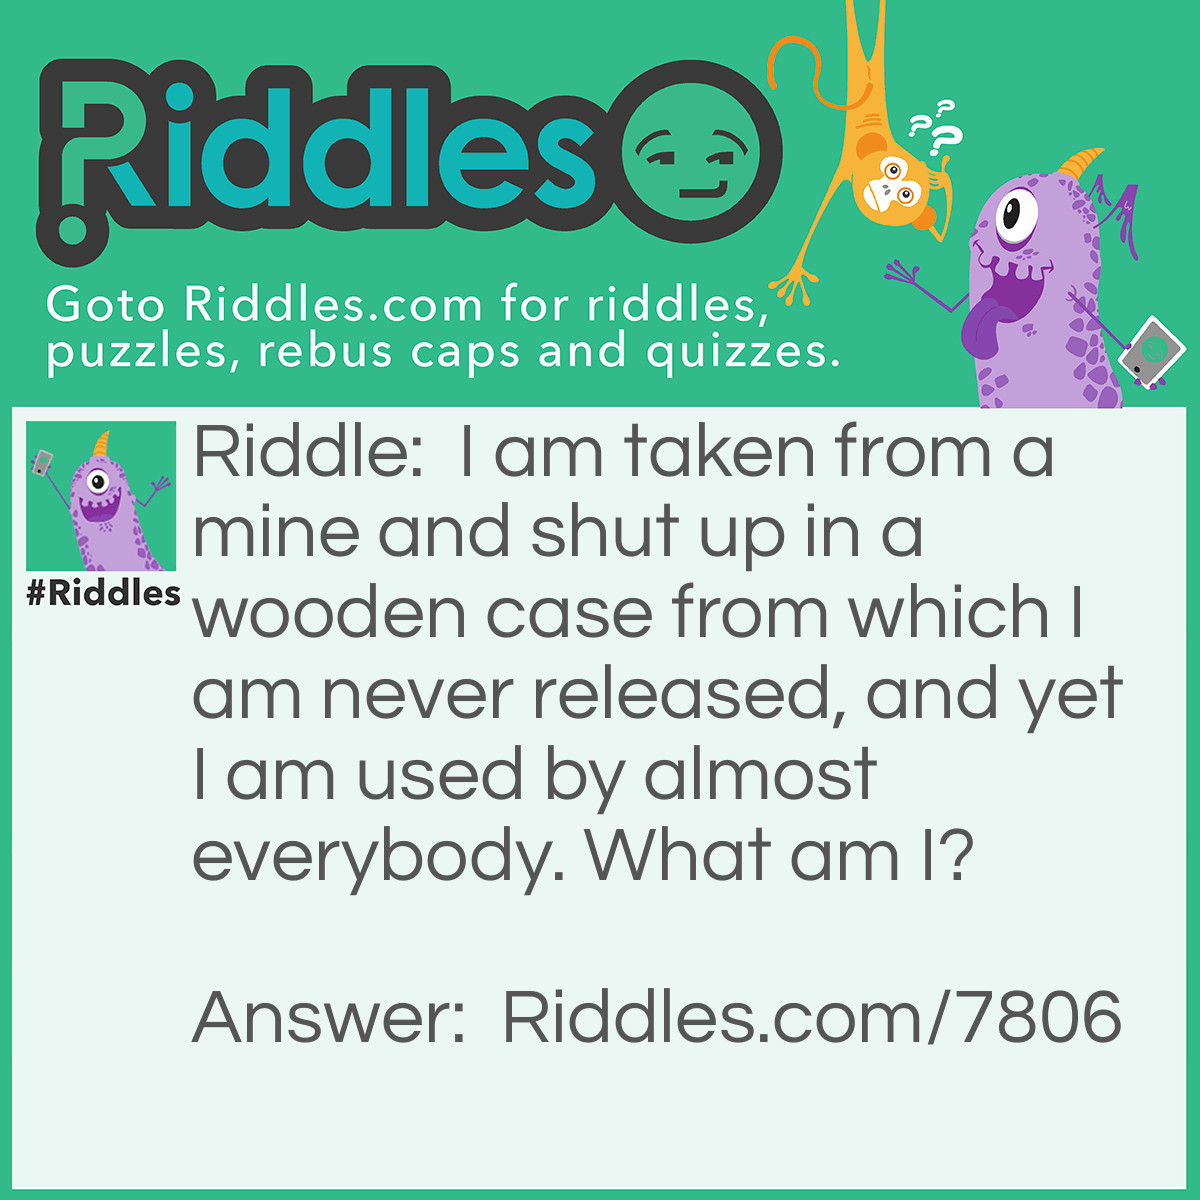 Riddle: I am taken from a mine and shut up in a wooden case from which I am never released, and yet I am used by almost everybody. What am I? Answer: Pencil Lead.